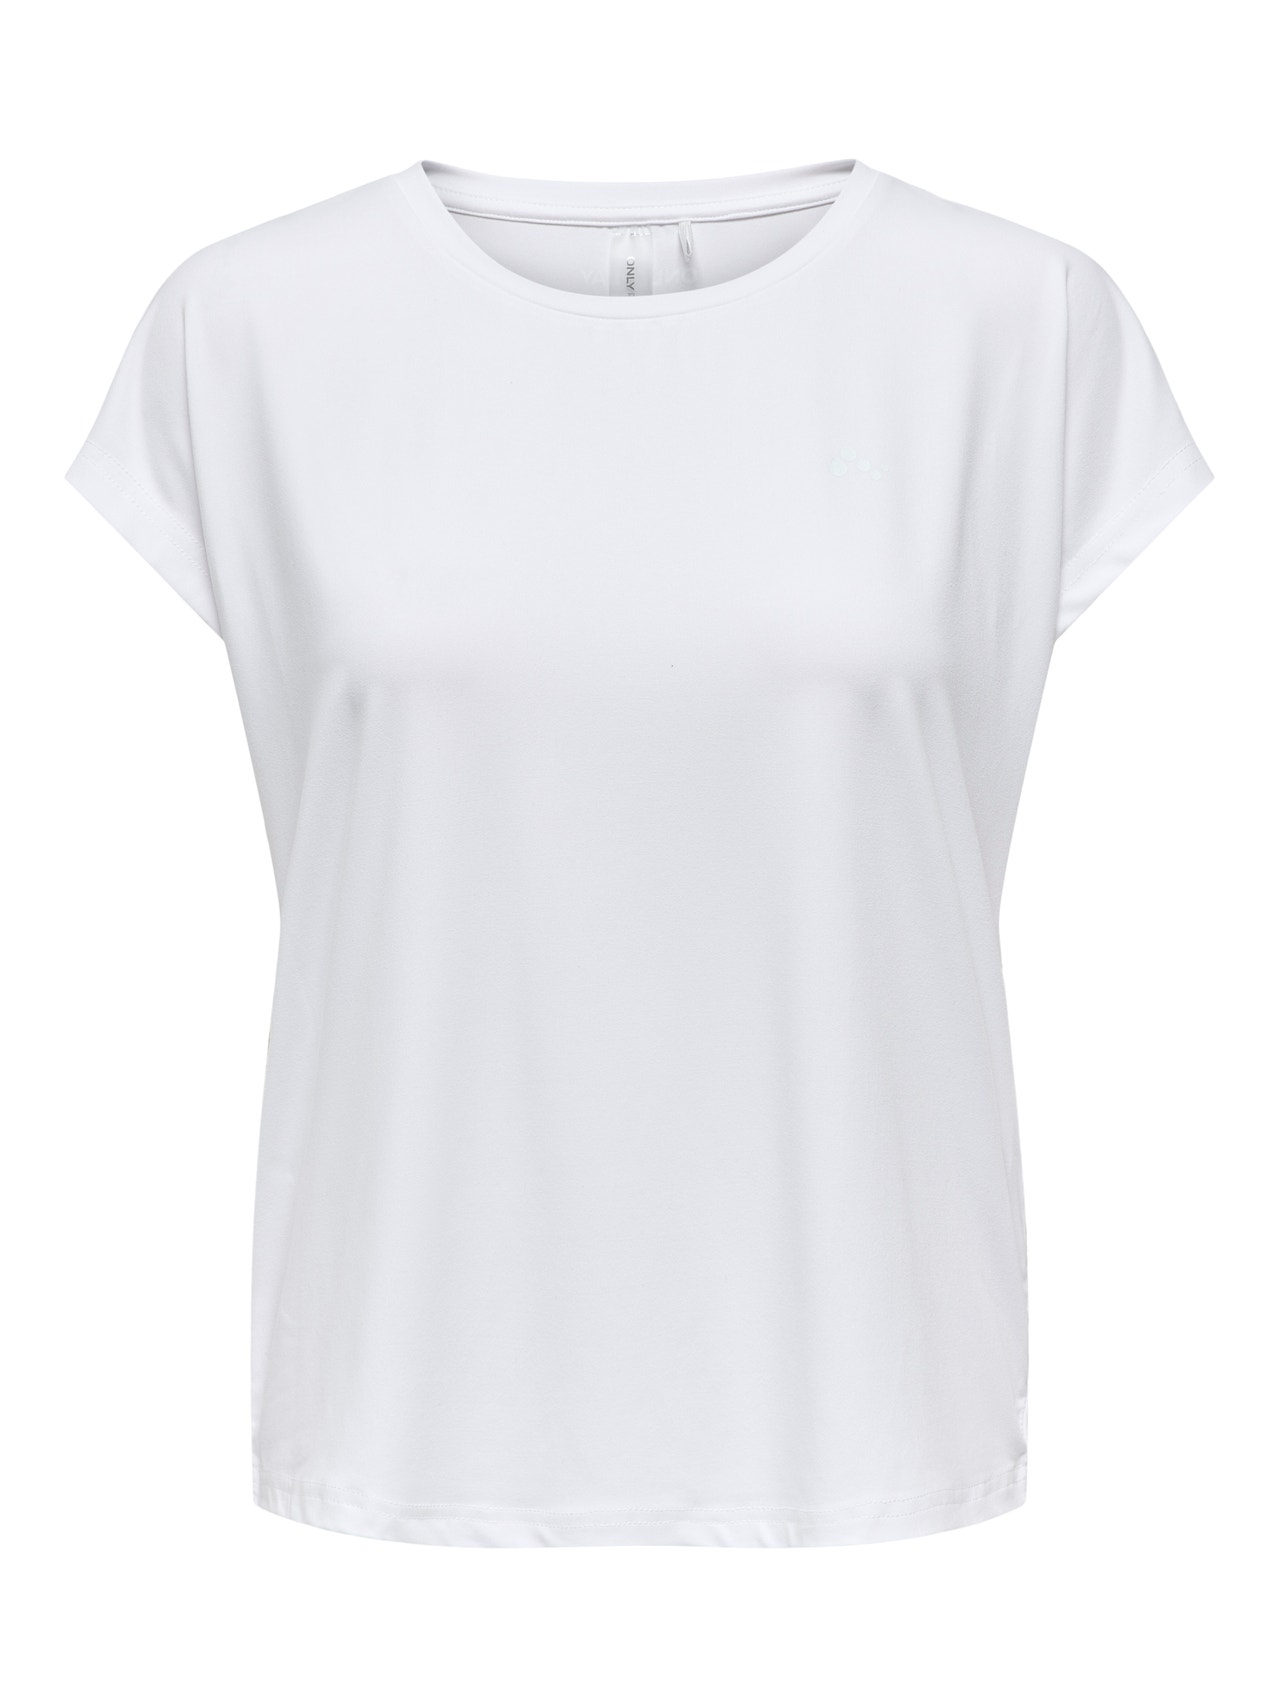 ONLY Loose Fit Round Neck Batwing sleeves T-Shirt -White - 15137012